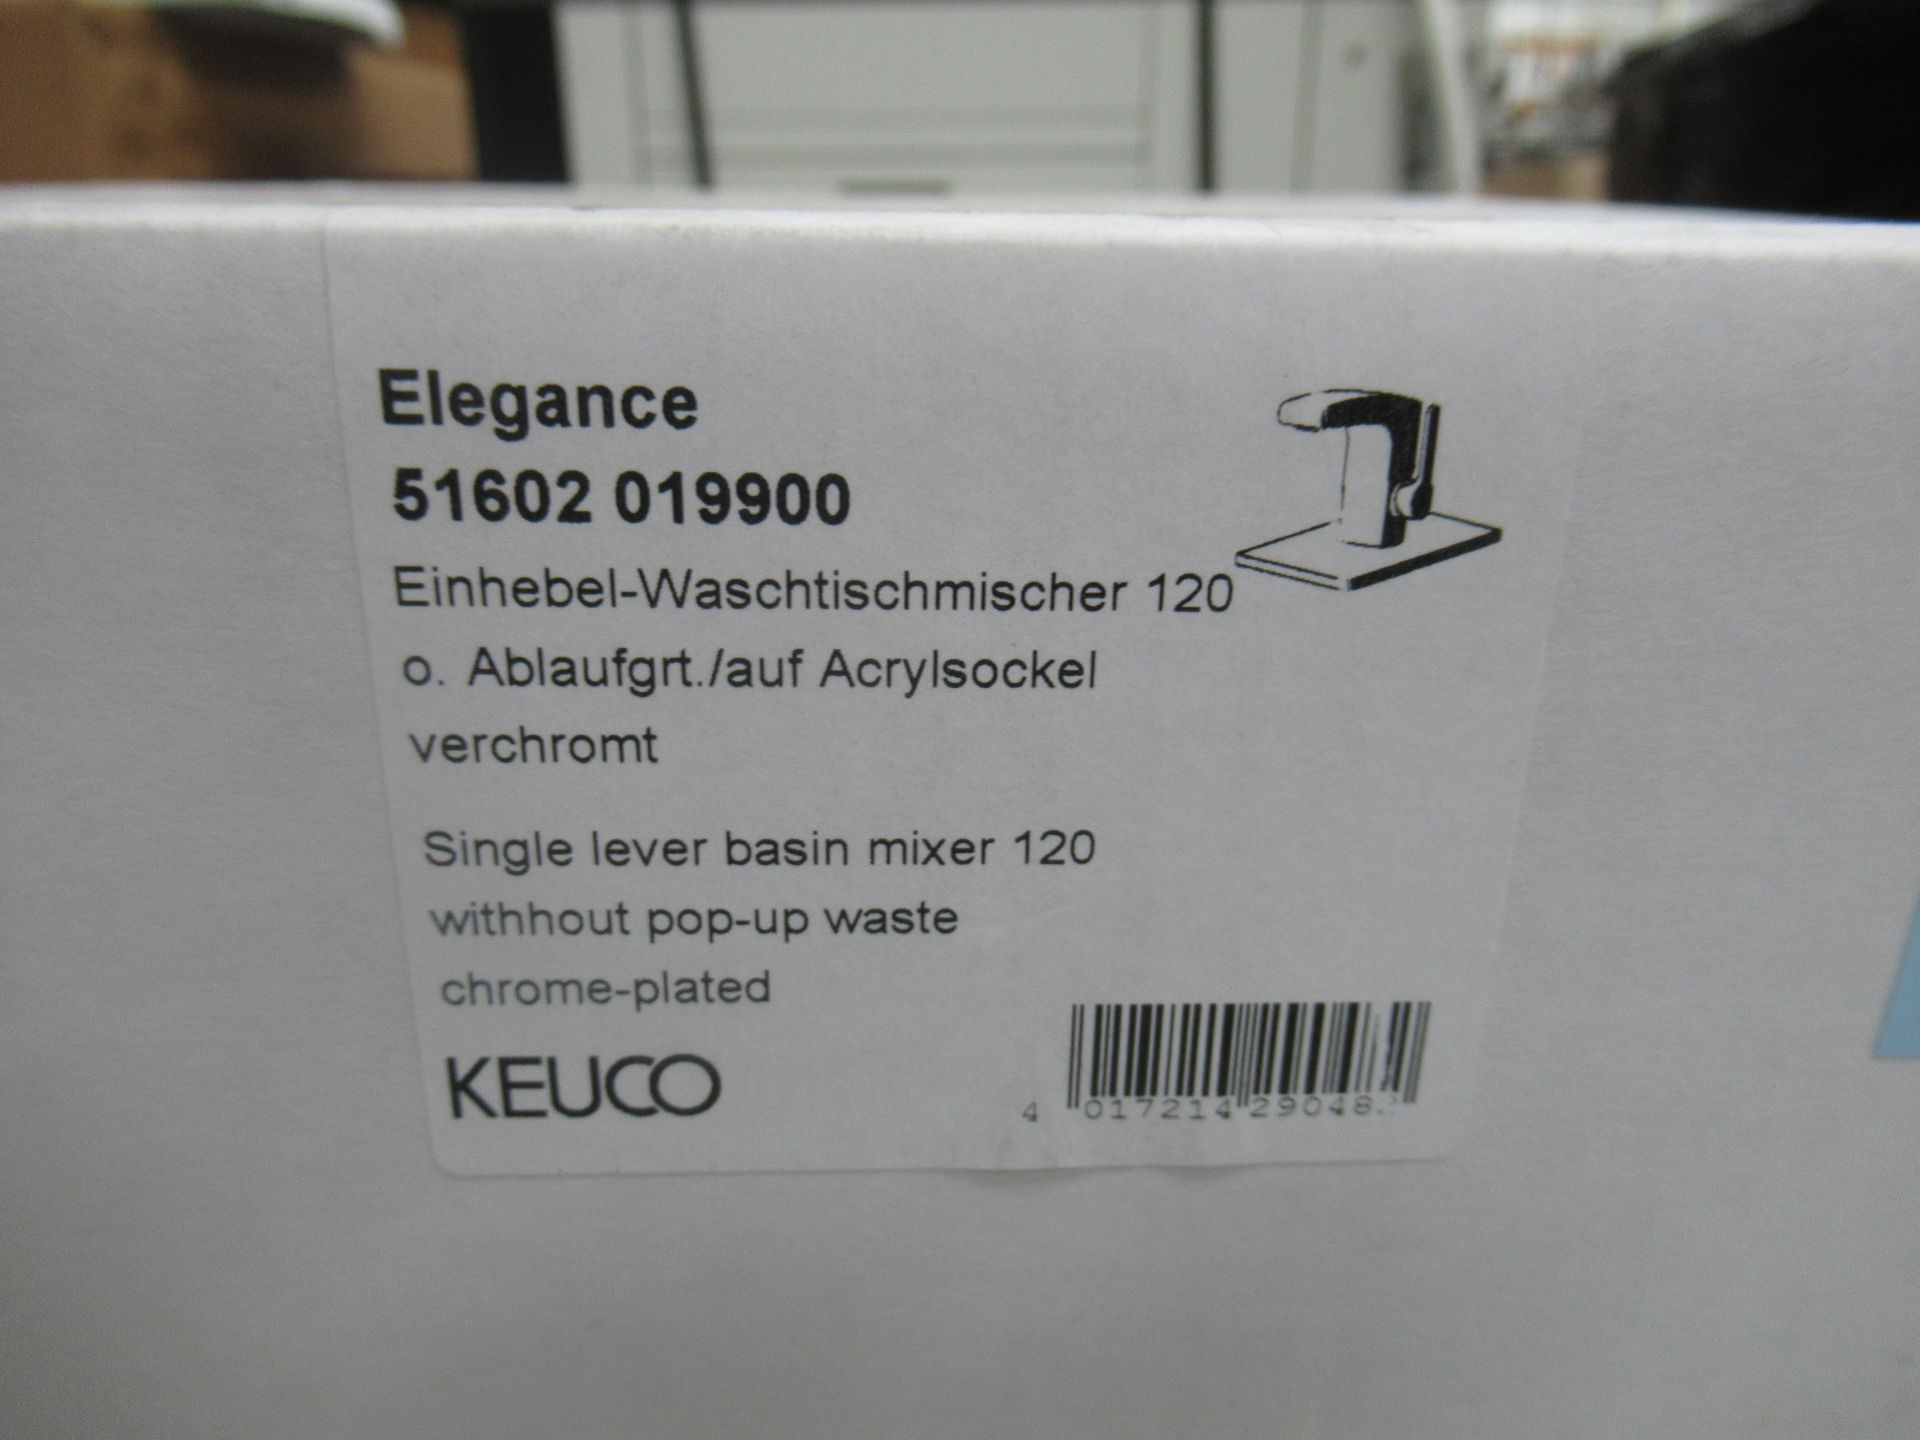 A Keuco Elegance Single Lever Basin Mixer 120-Tap, Chrome Plated, P/N 51602-019900 - Image 2 of 3